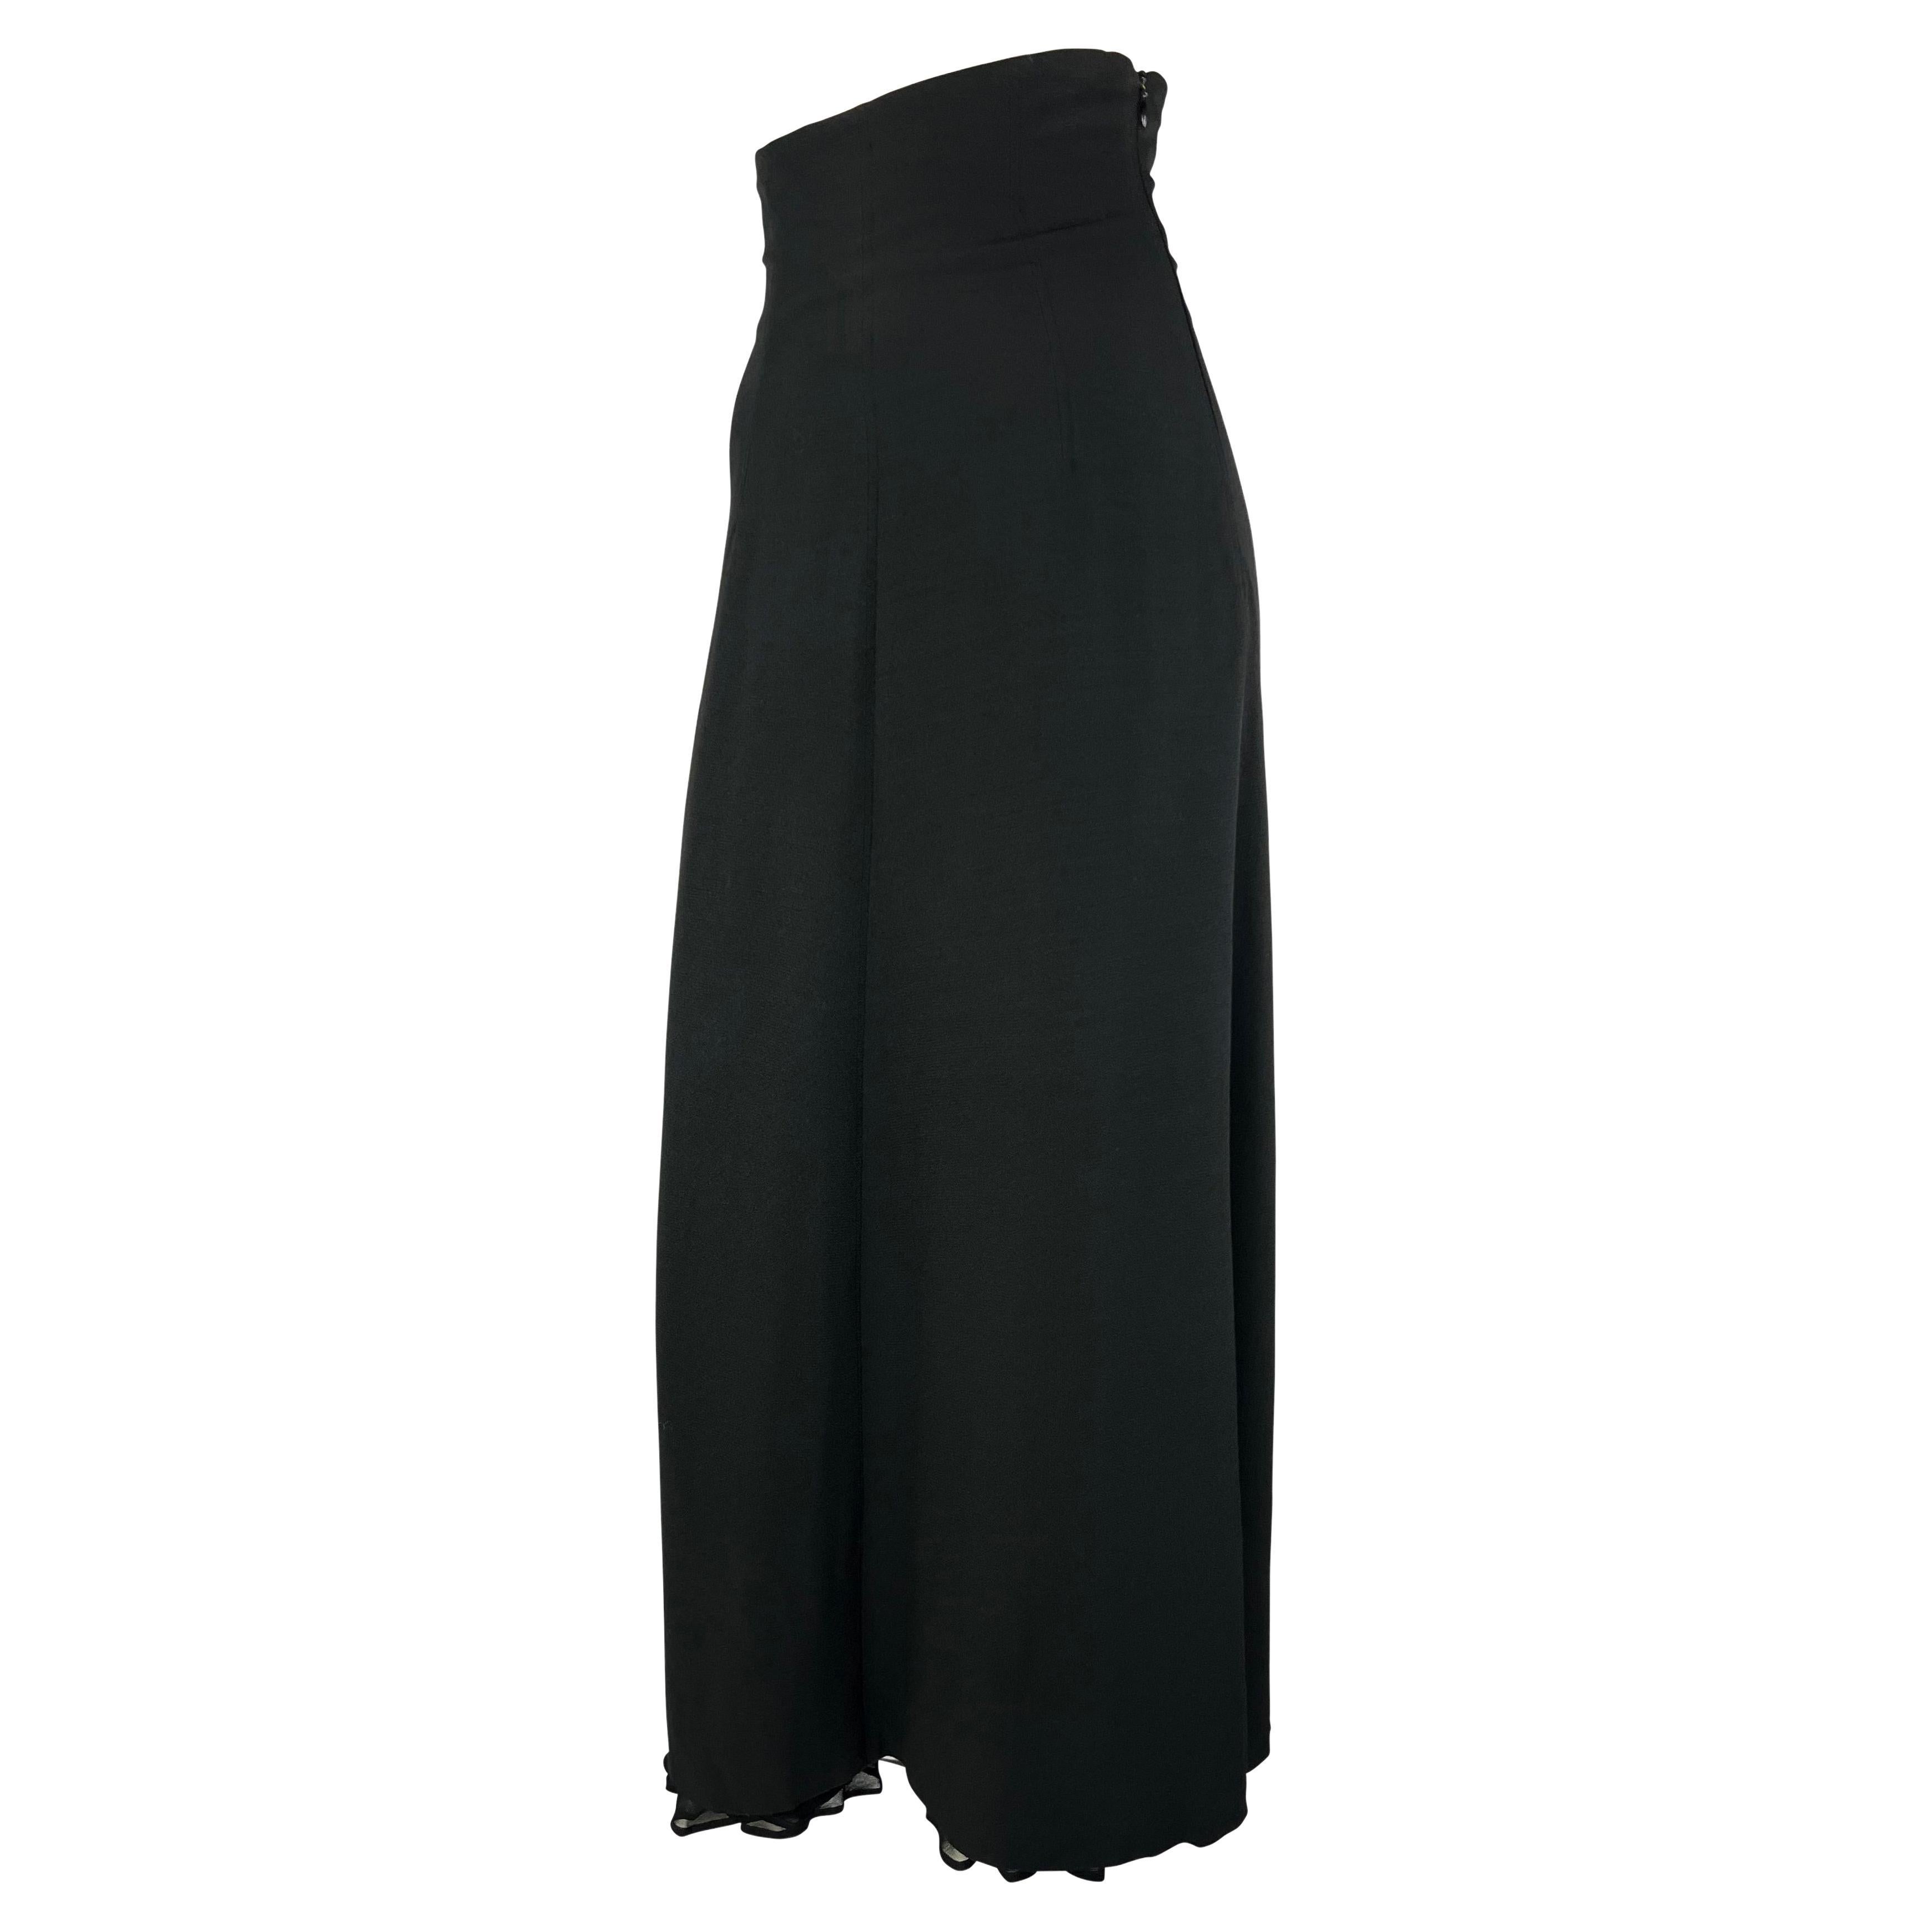 1990s Dolce & Gabbana Chiffon Ruffle High Waisted Slit Black Maxi Skirt In Good Condition For Sale In West Hollywood, CA